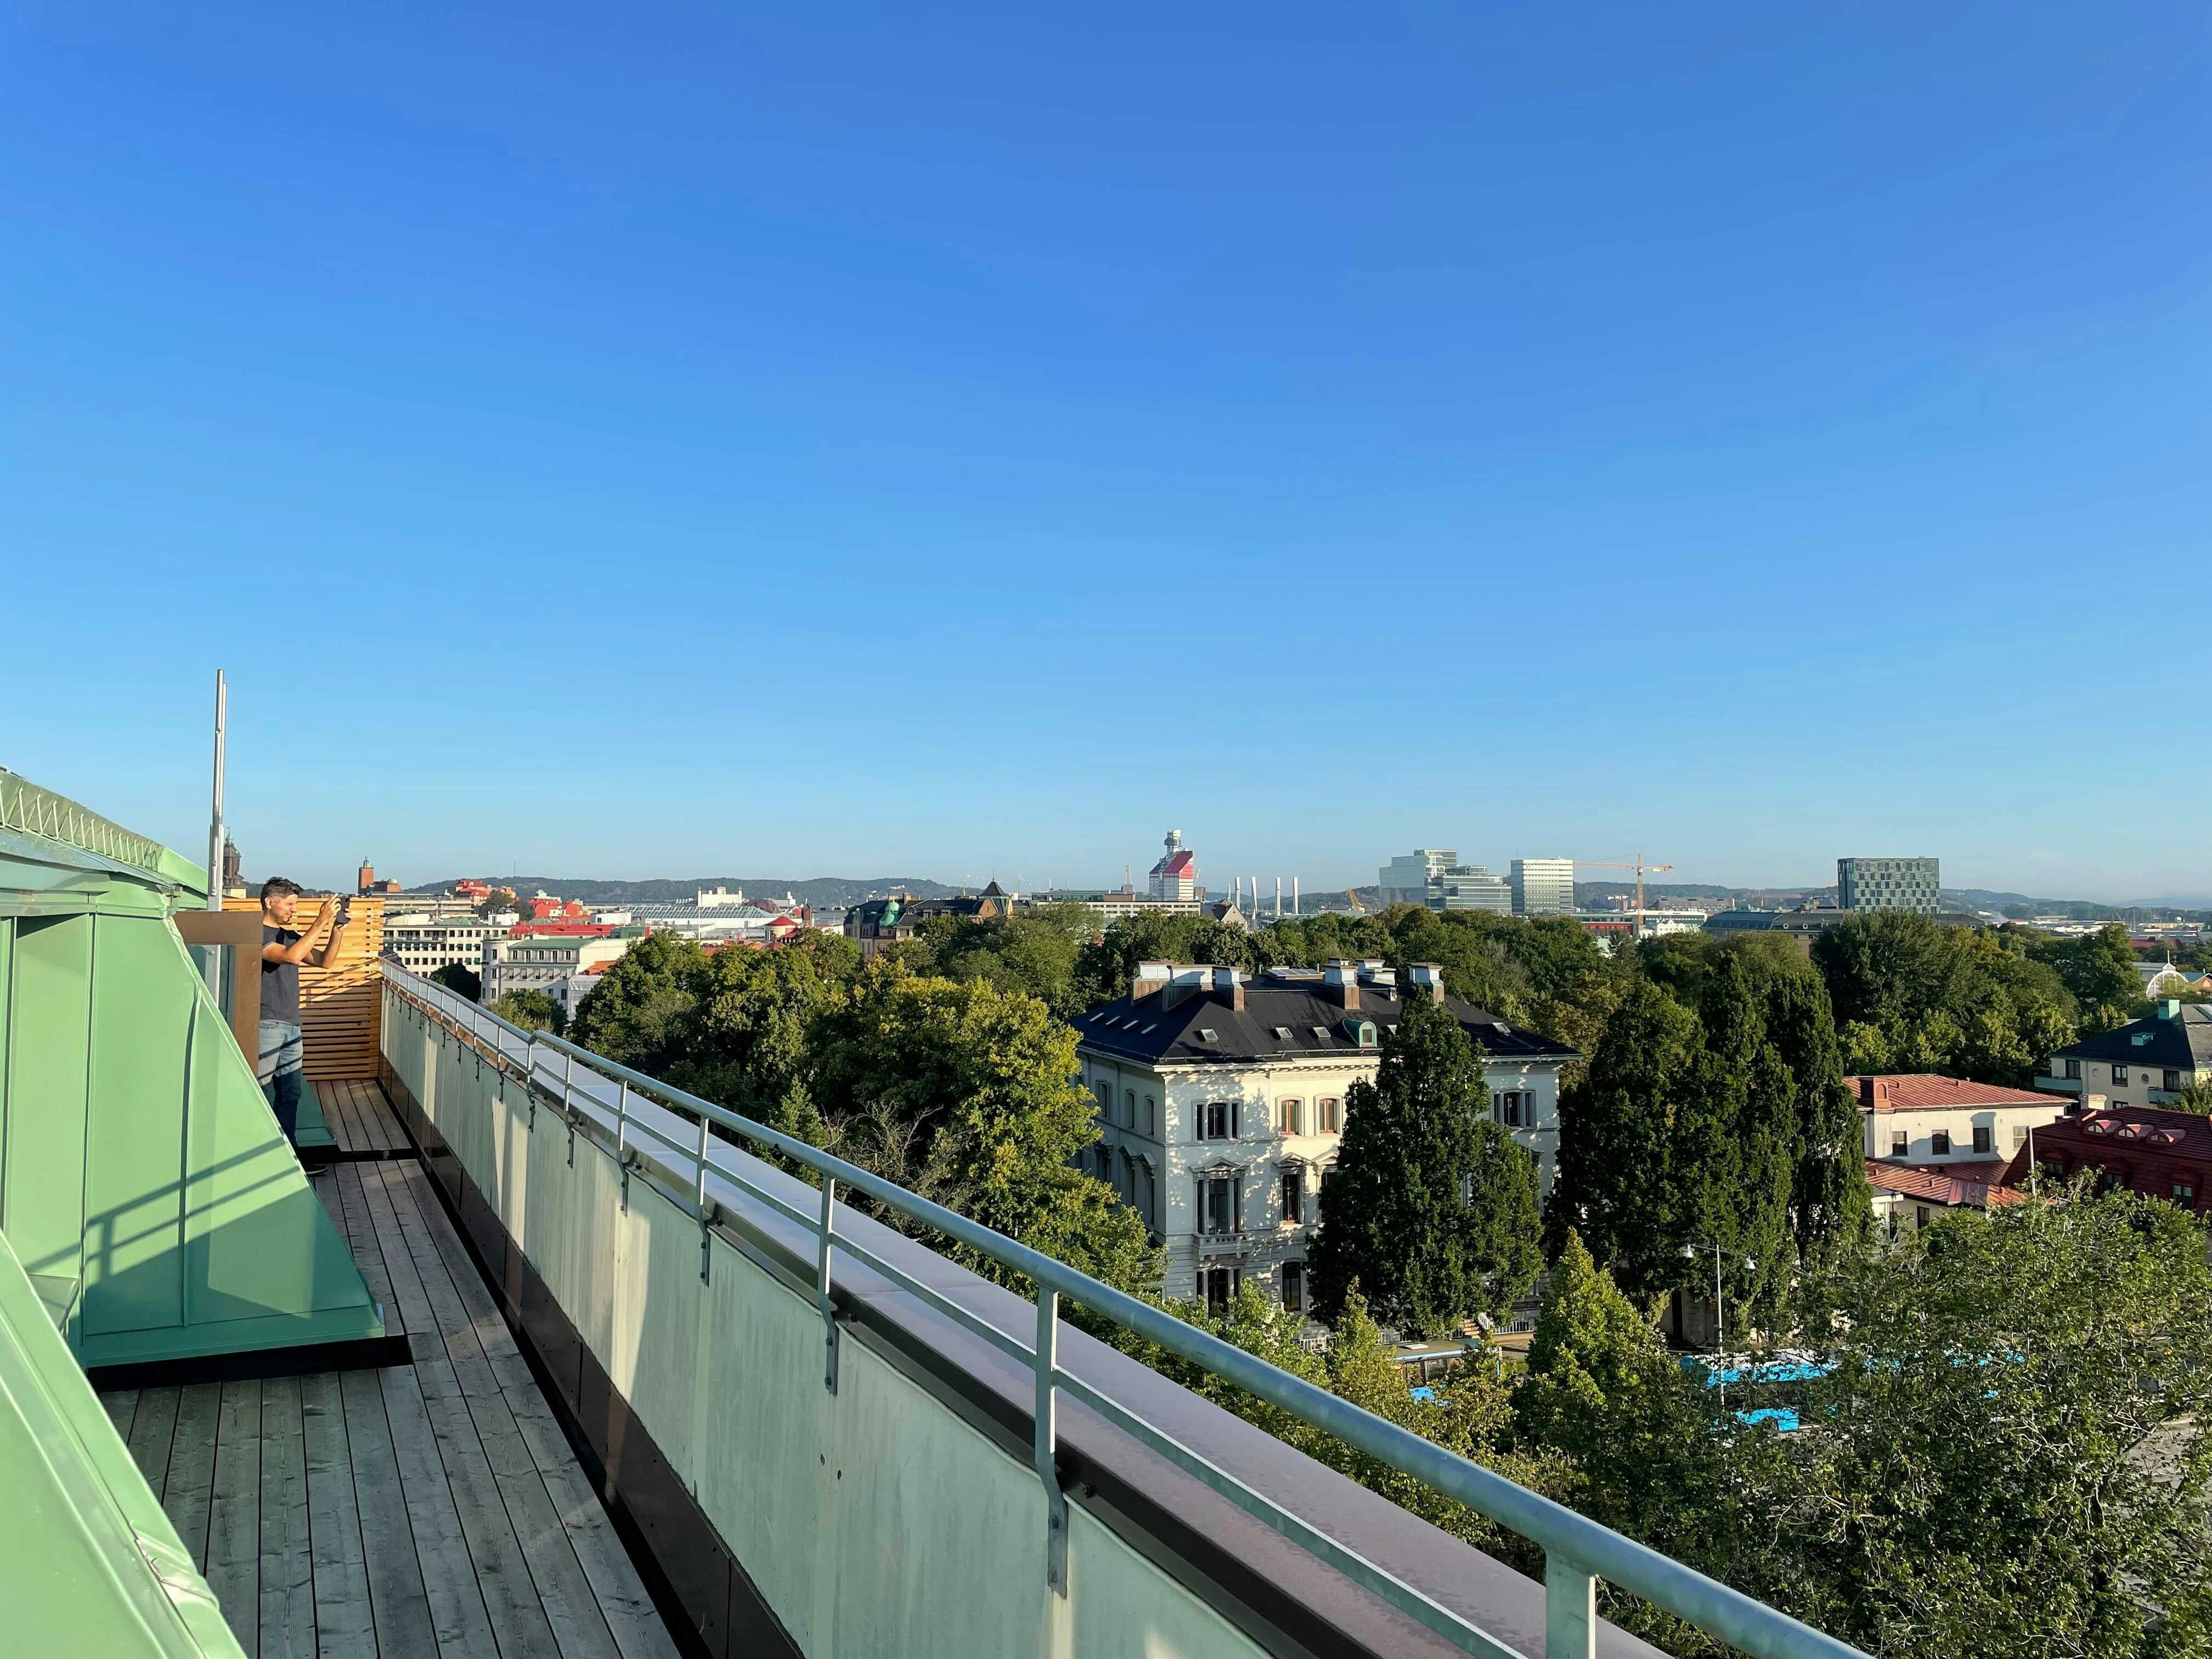 A view from the office balcony during a sunny day. Overlooking the city of Gothenburg.